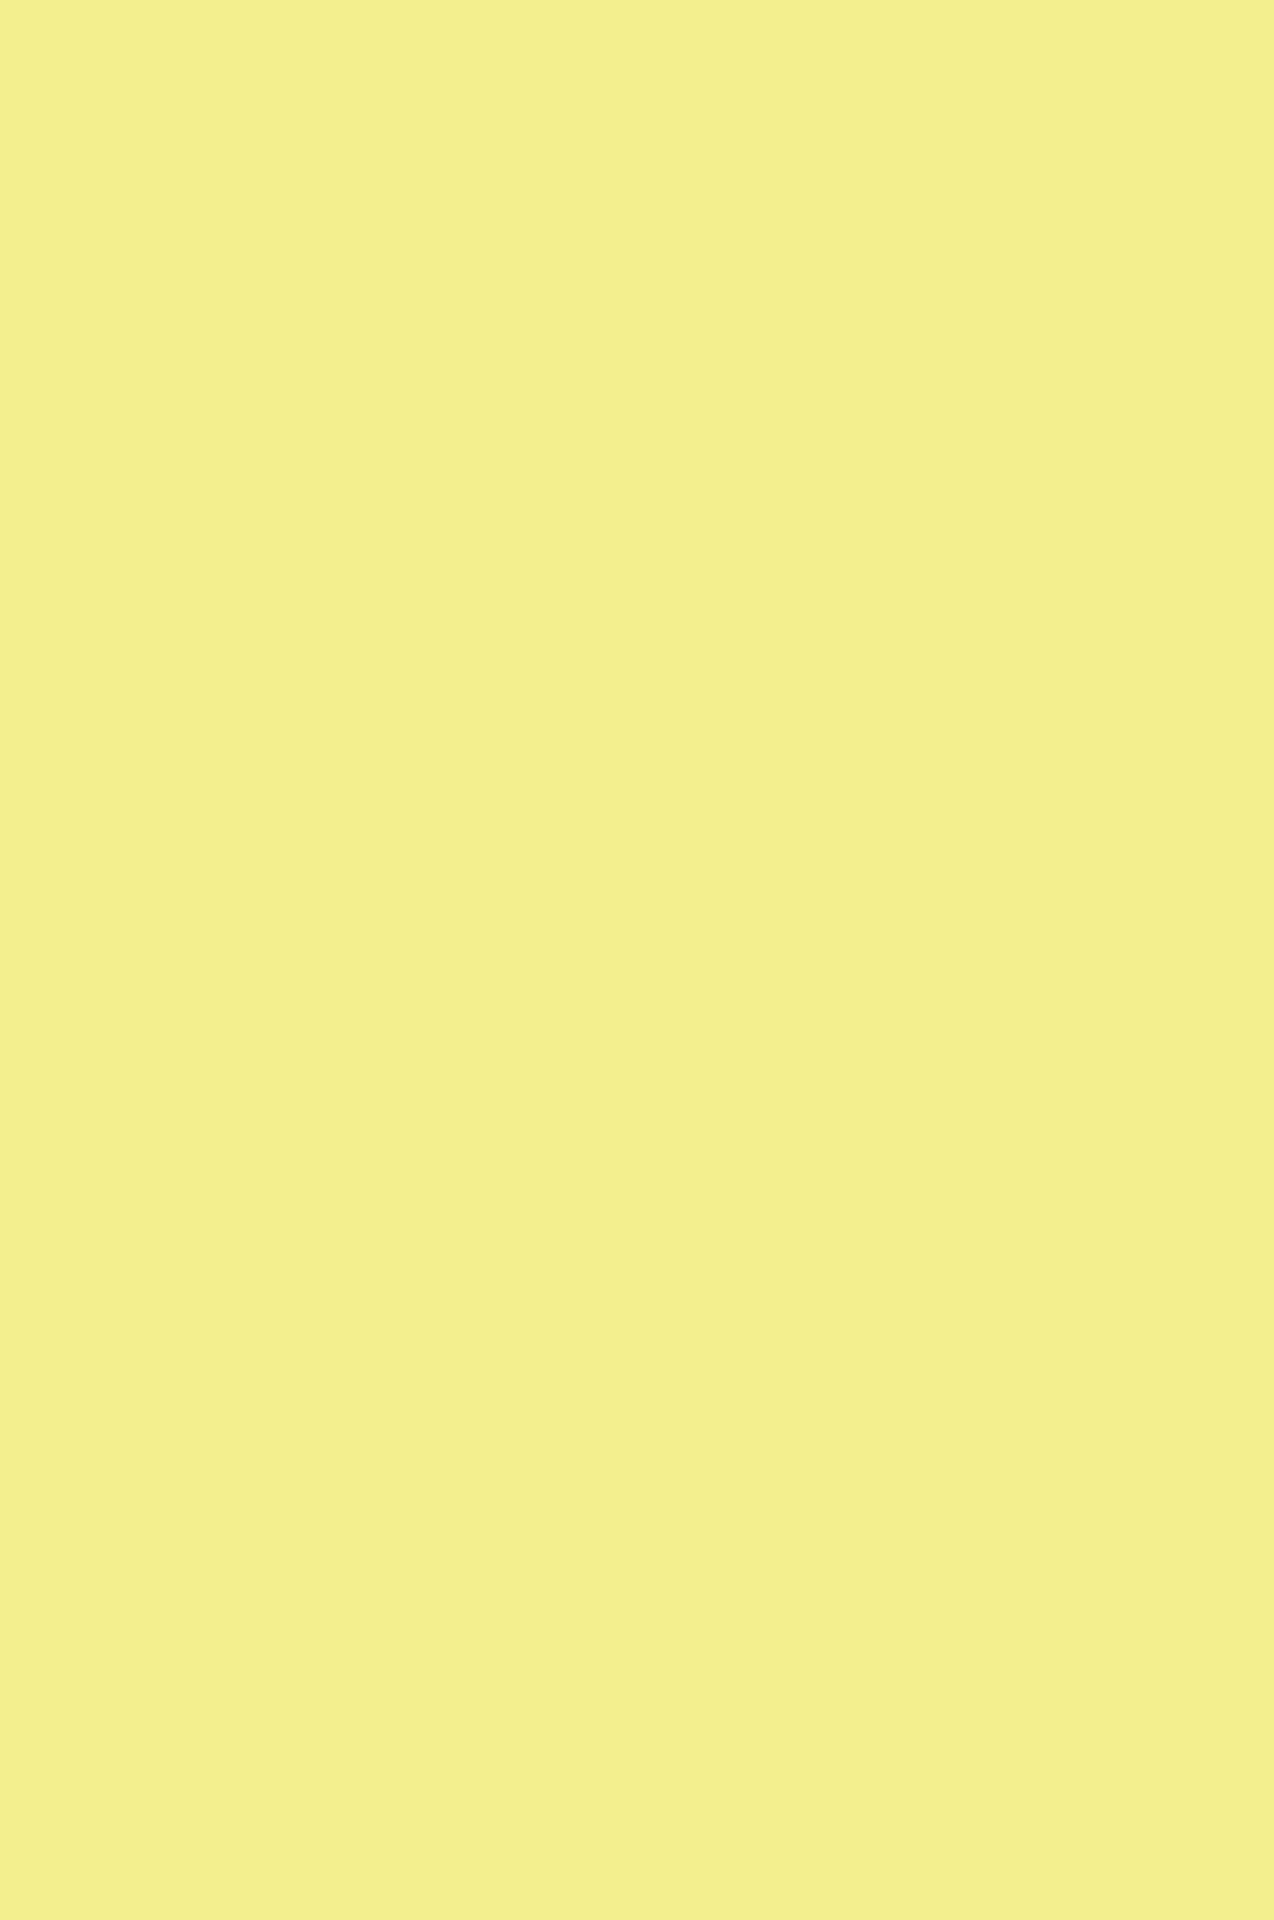 Bright and cheerful solid yellow Wallpaper